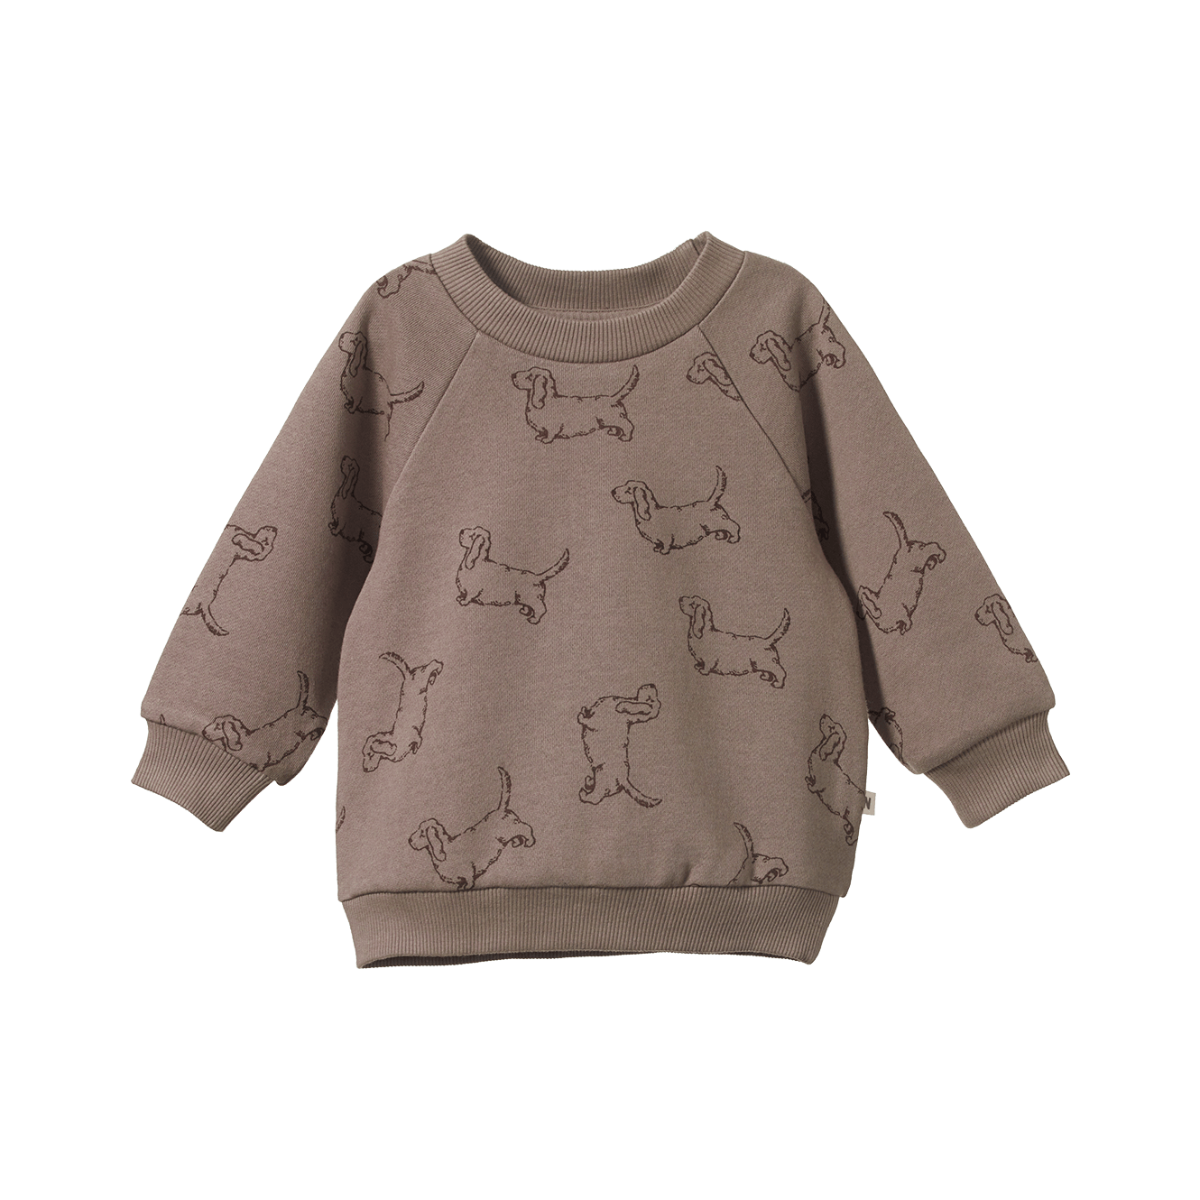 Nature Baby Emerson Sweater - Happy Hounds Print Jumper Nature Baby 